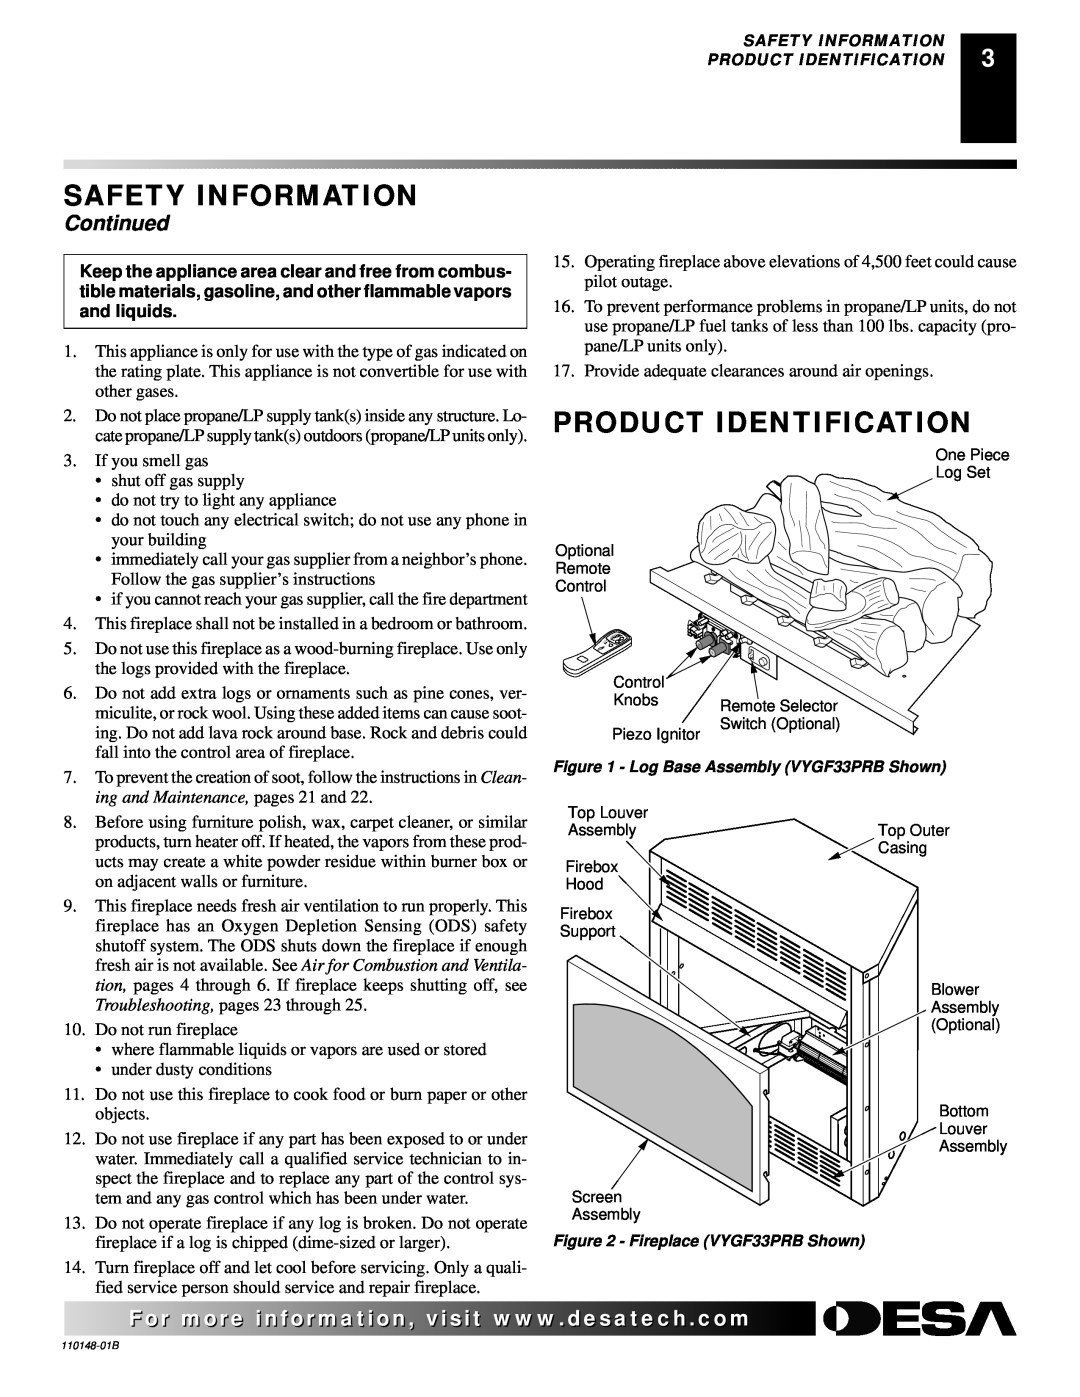 Desa FPVF33NRA, YGF33PRB Product Identification, Continued, ing and Maintenance, pages 21 and, Safety Information 